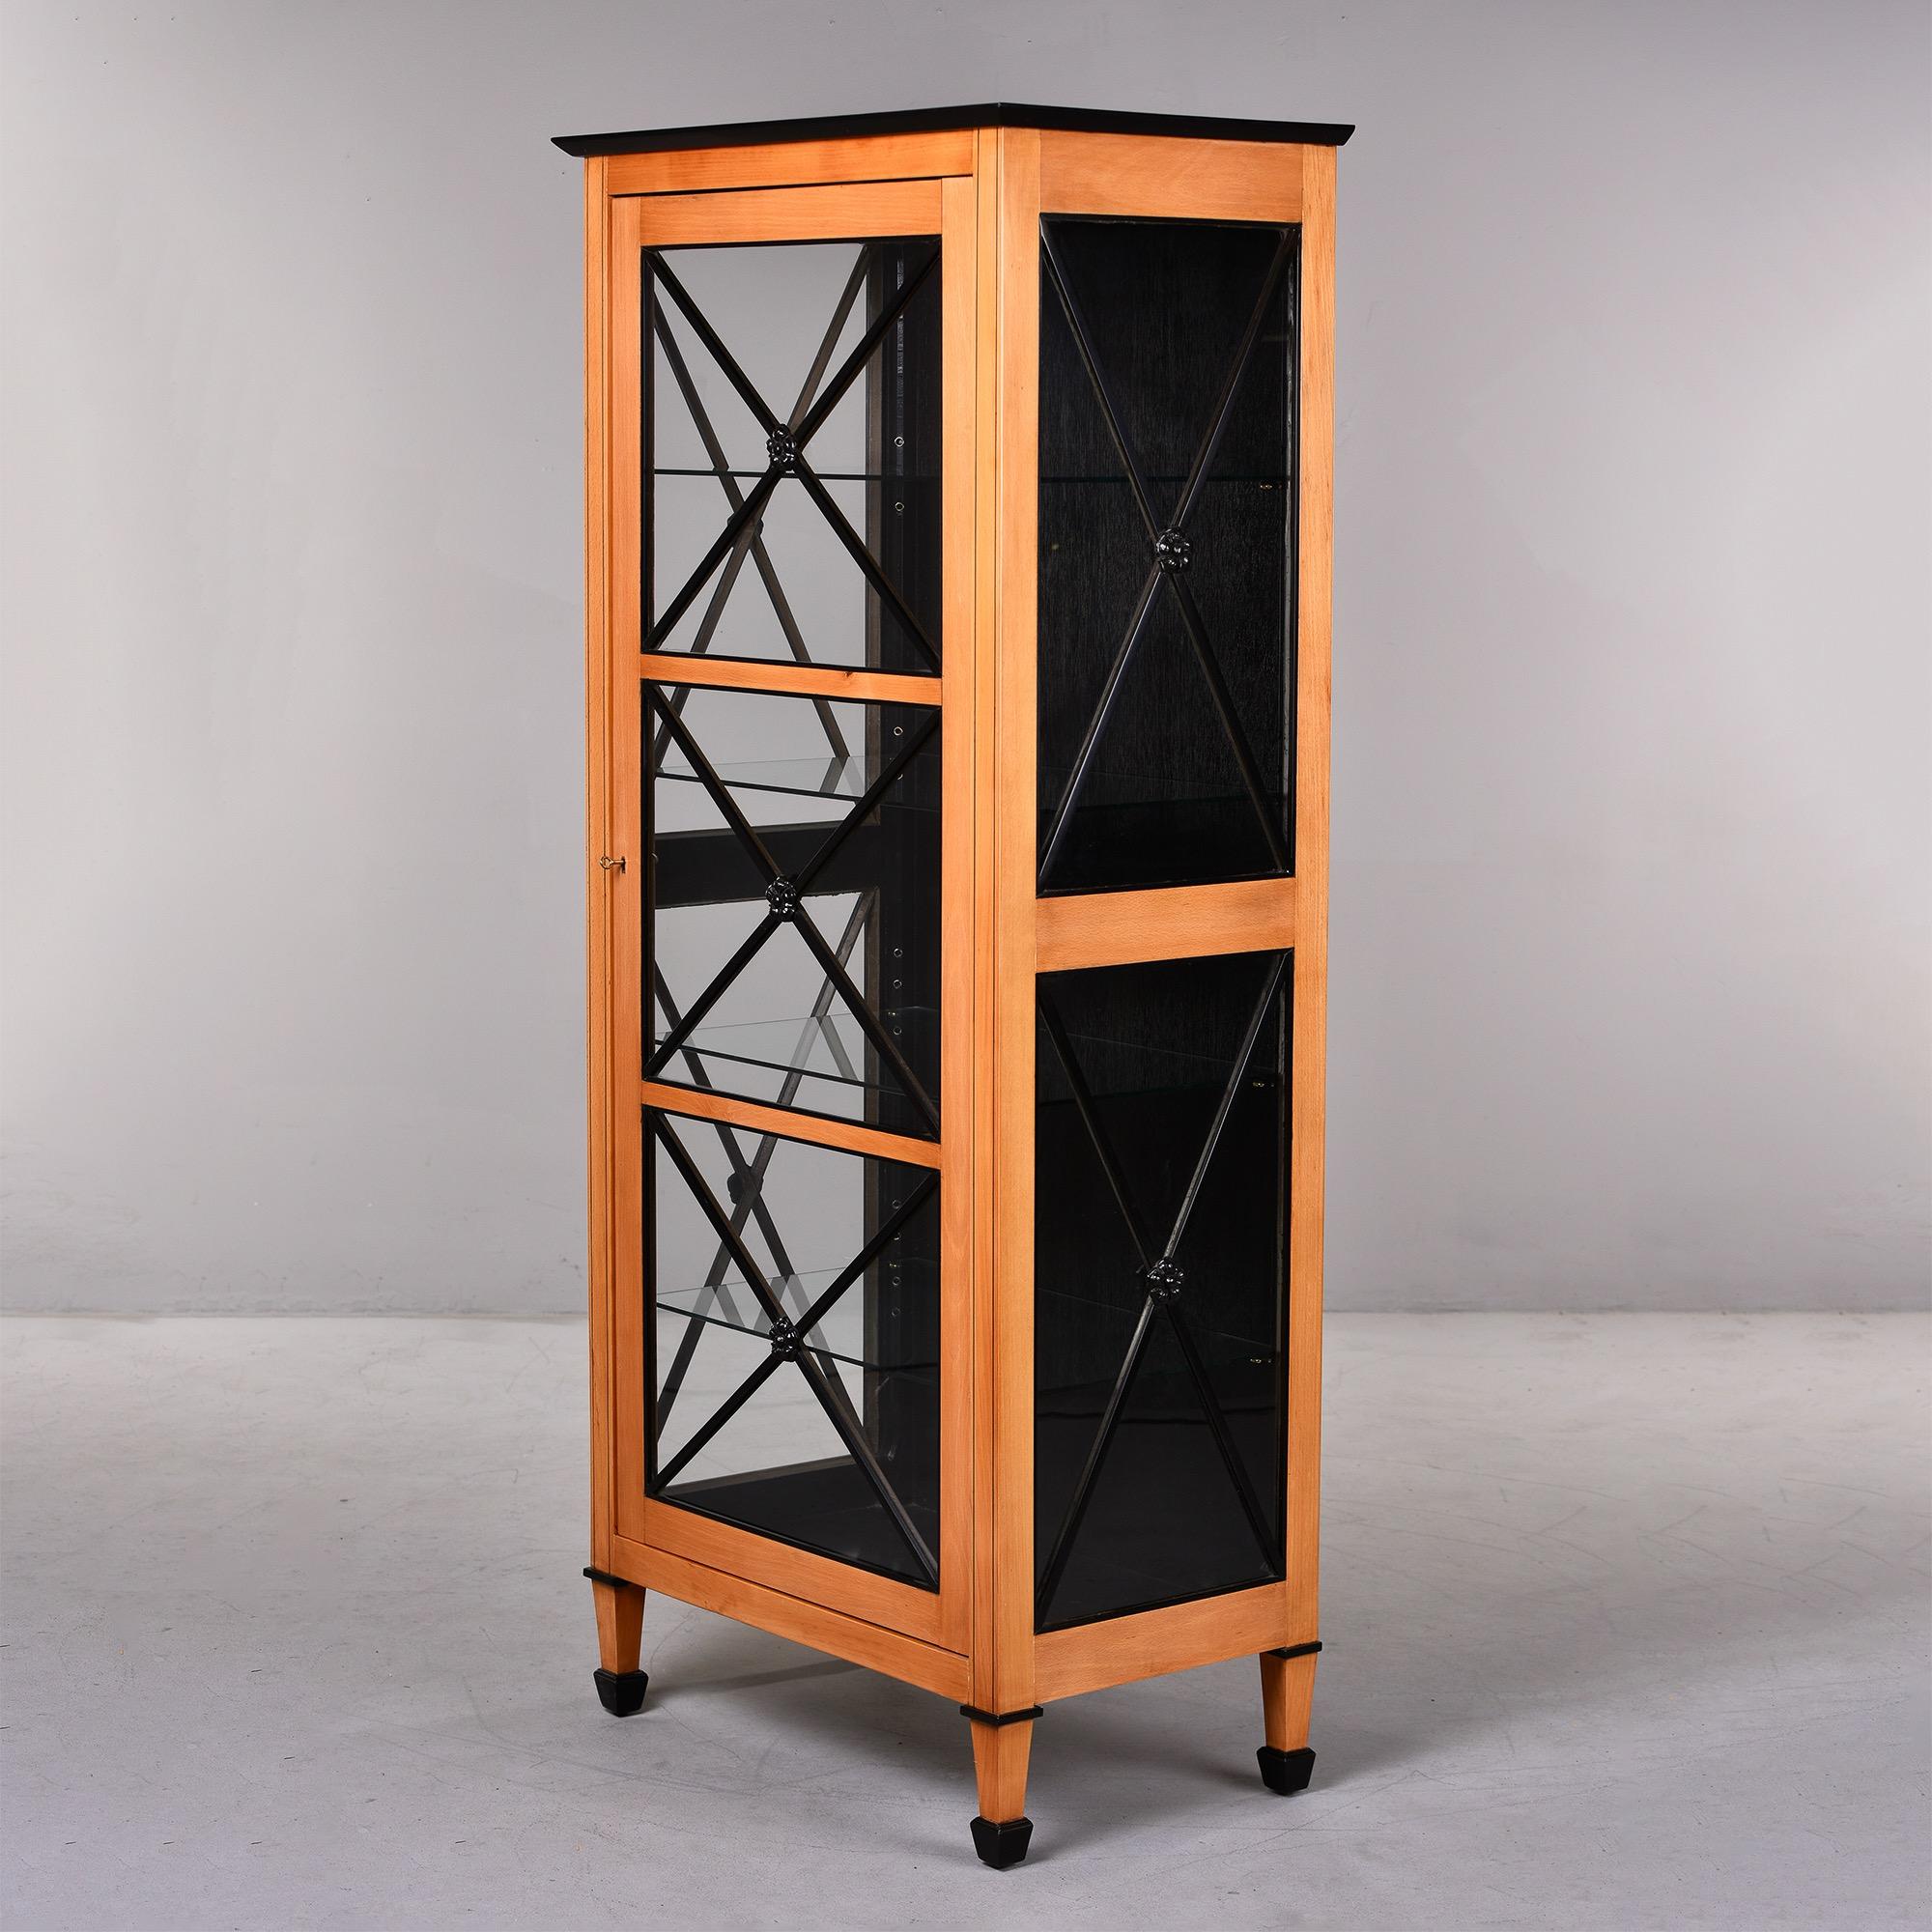 English Tall Bespoke Deco Inspired Maple Glazed Cabinet For Sale